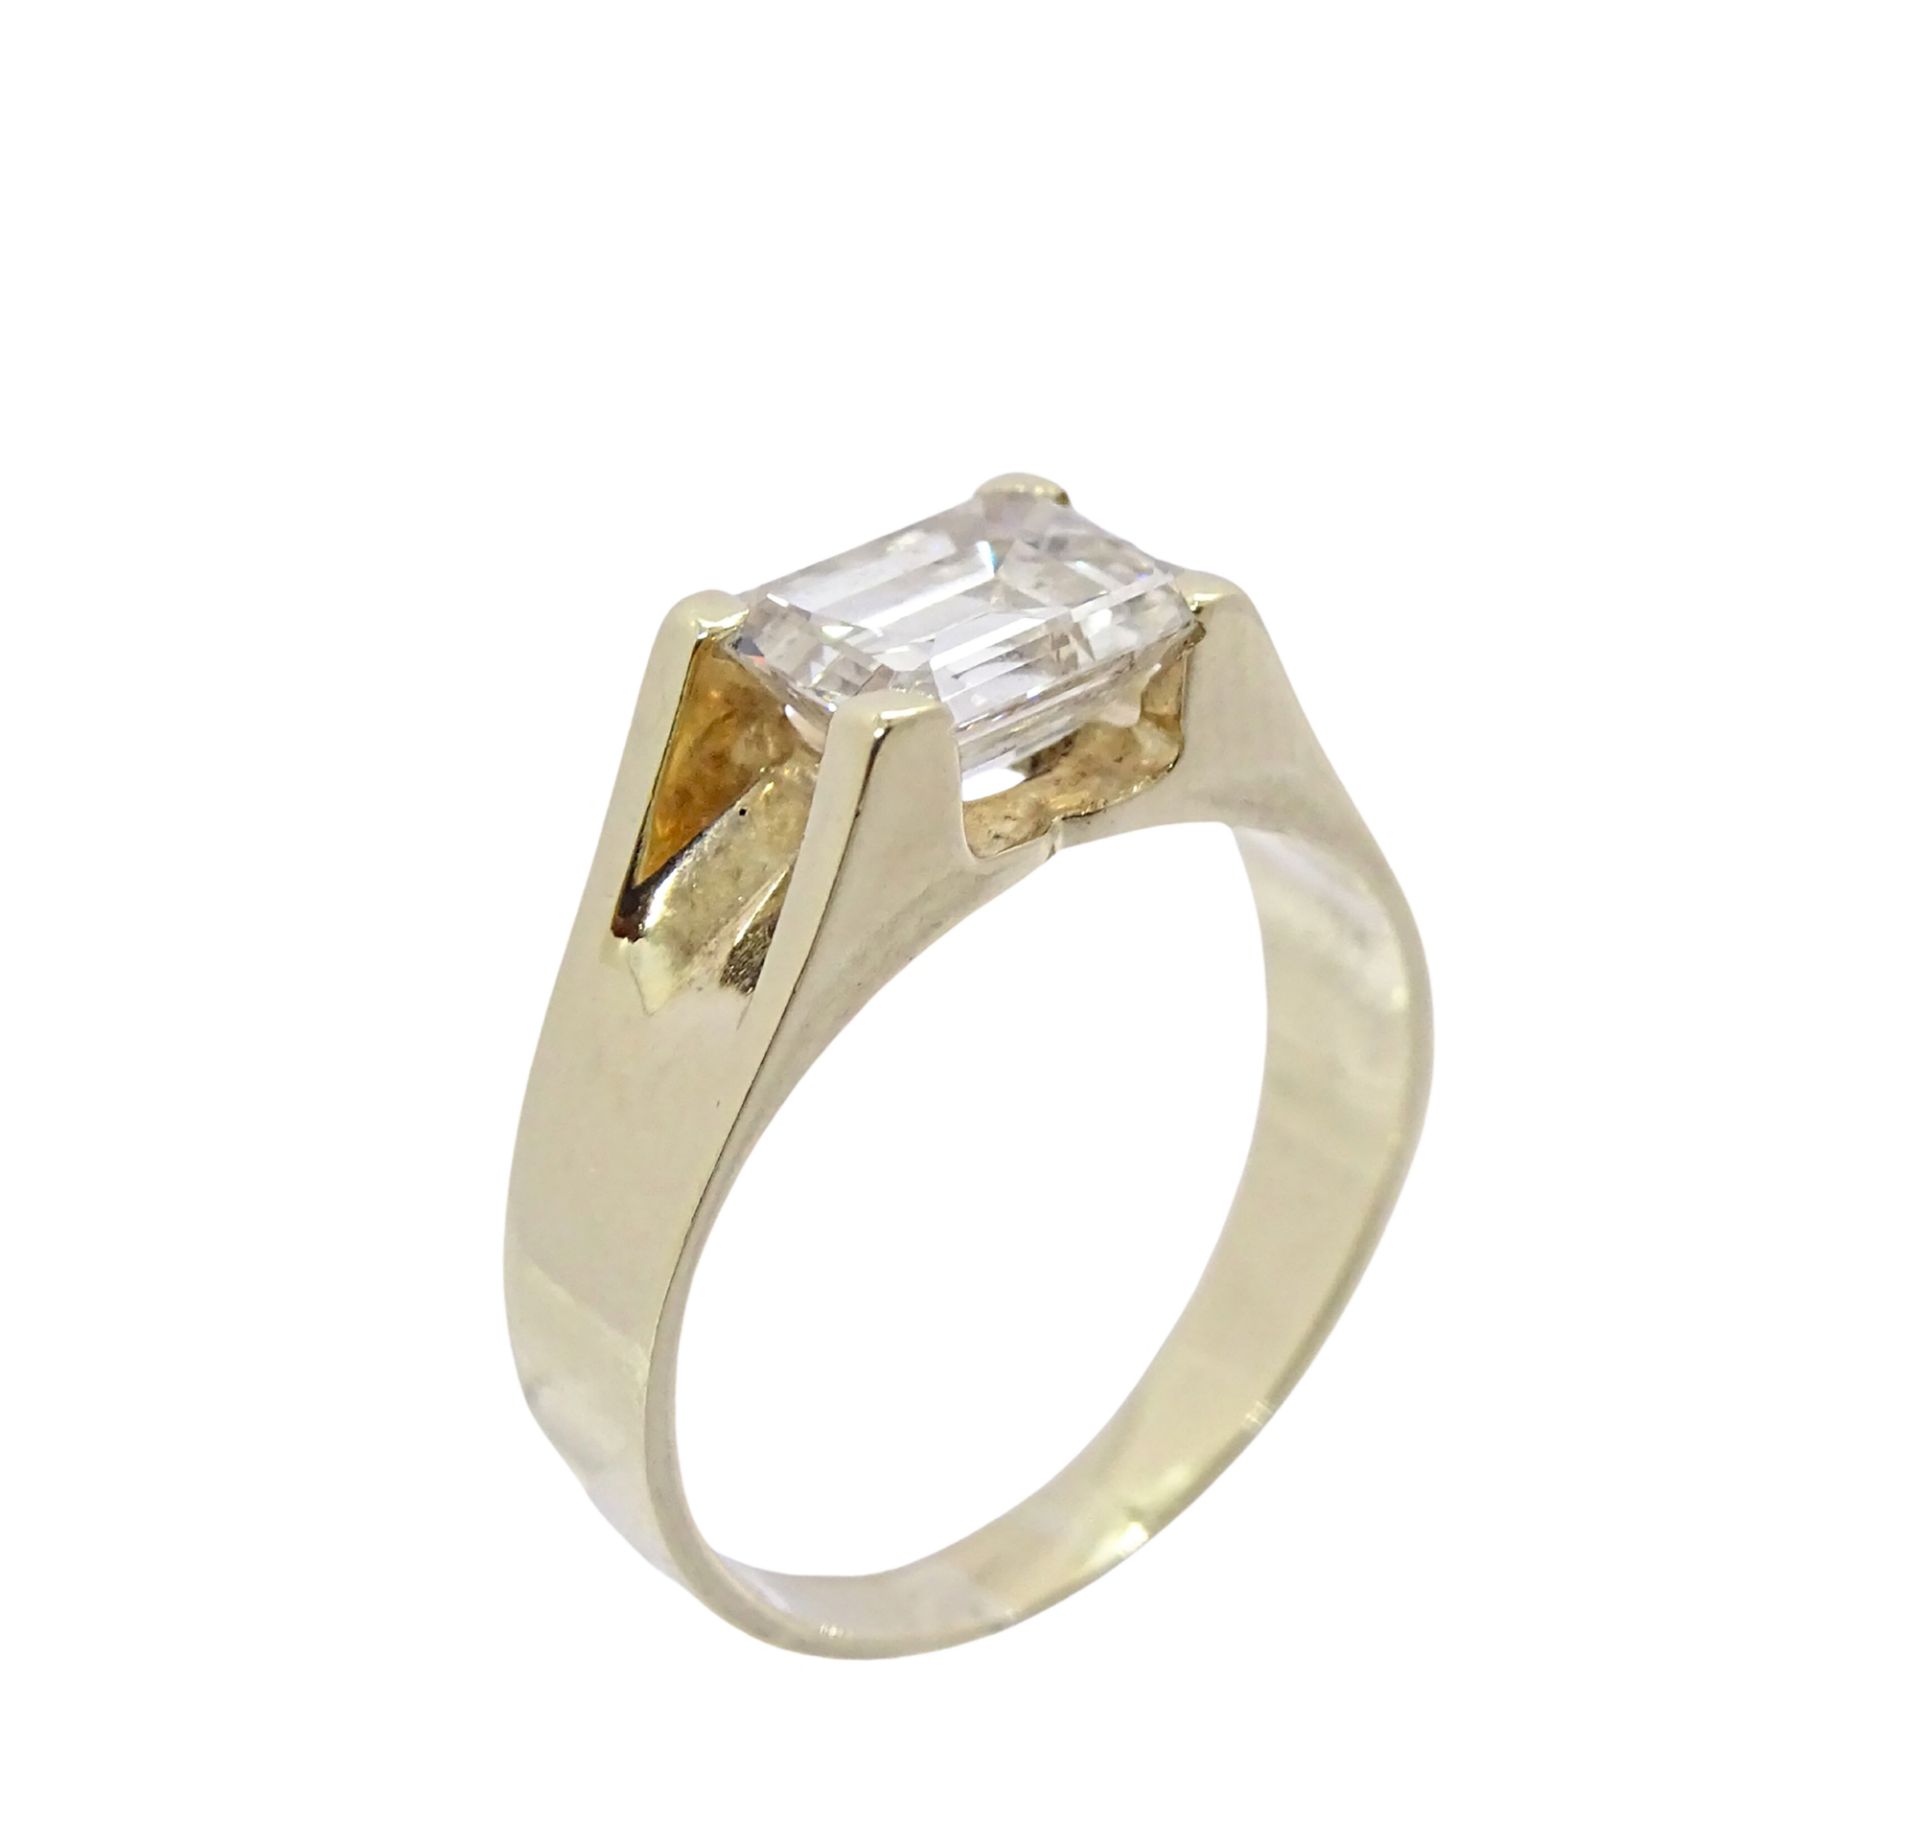 Important Unisex Solitaire Ring for Lady or Gentleman with 1.66 ct emerald cut diamond, mounted in 1